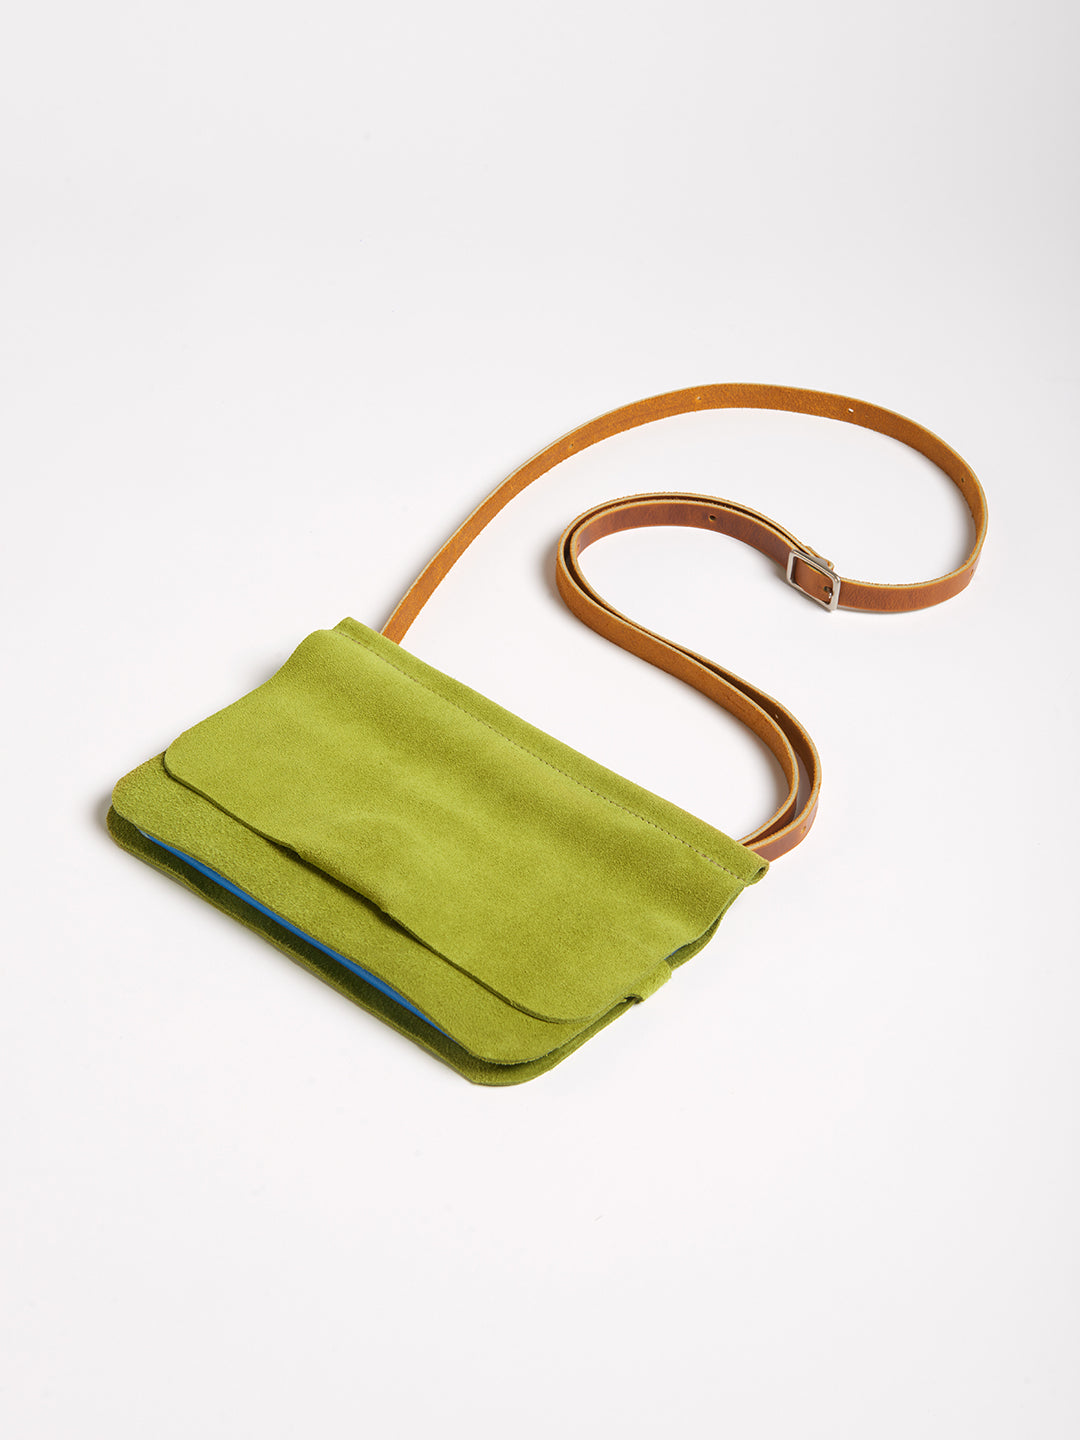 The Novella bag - Moss green suede leather